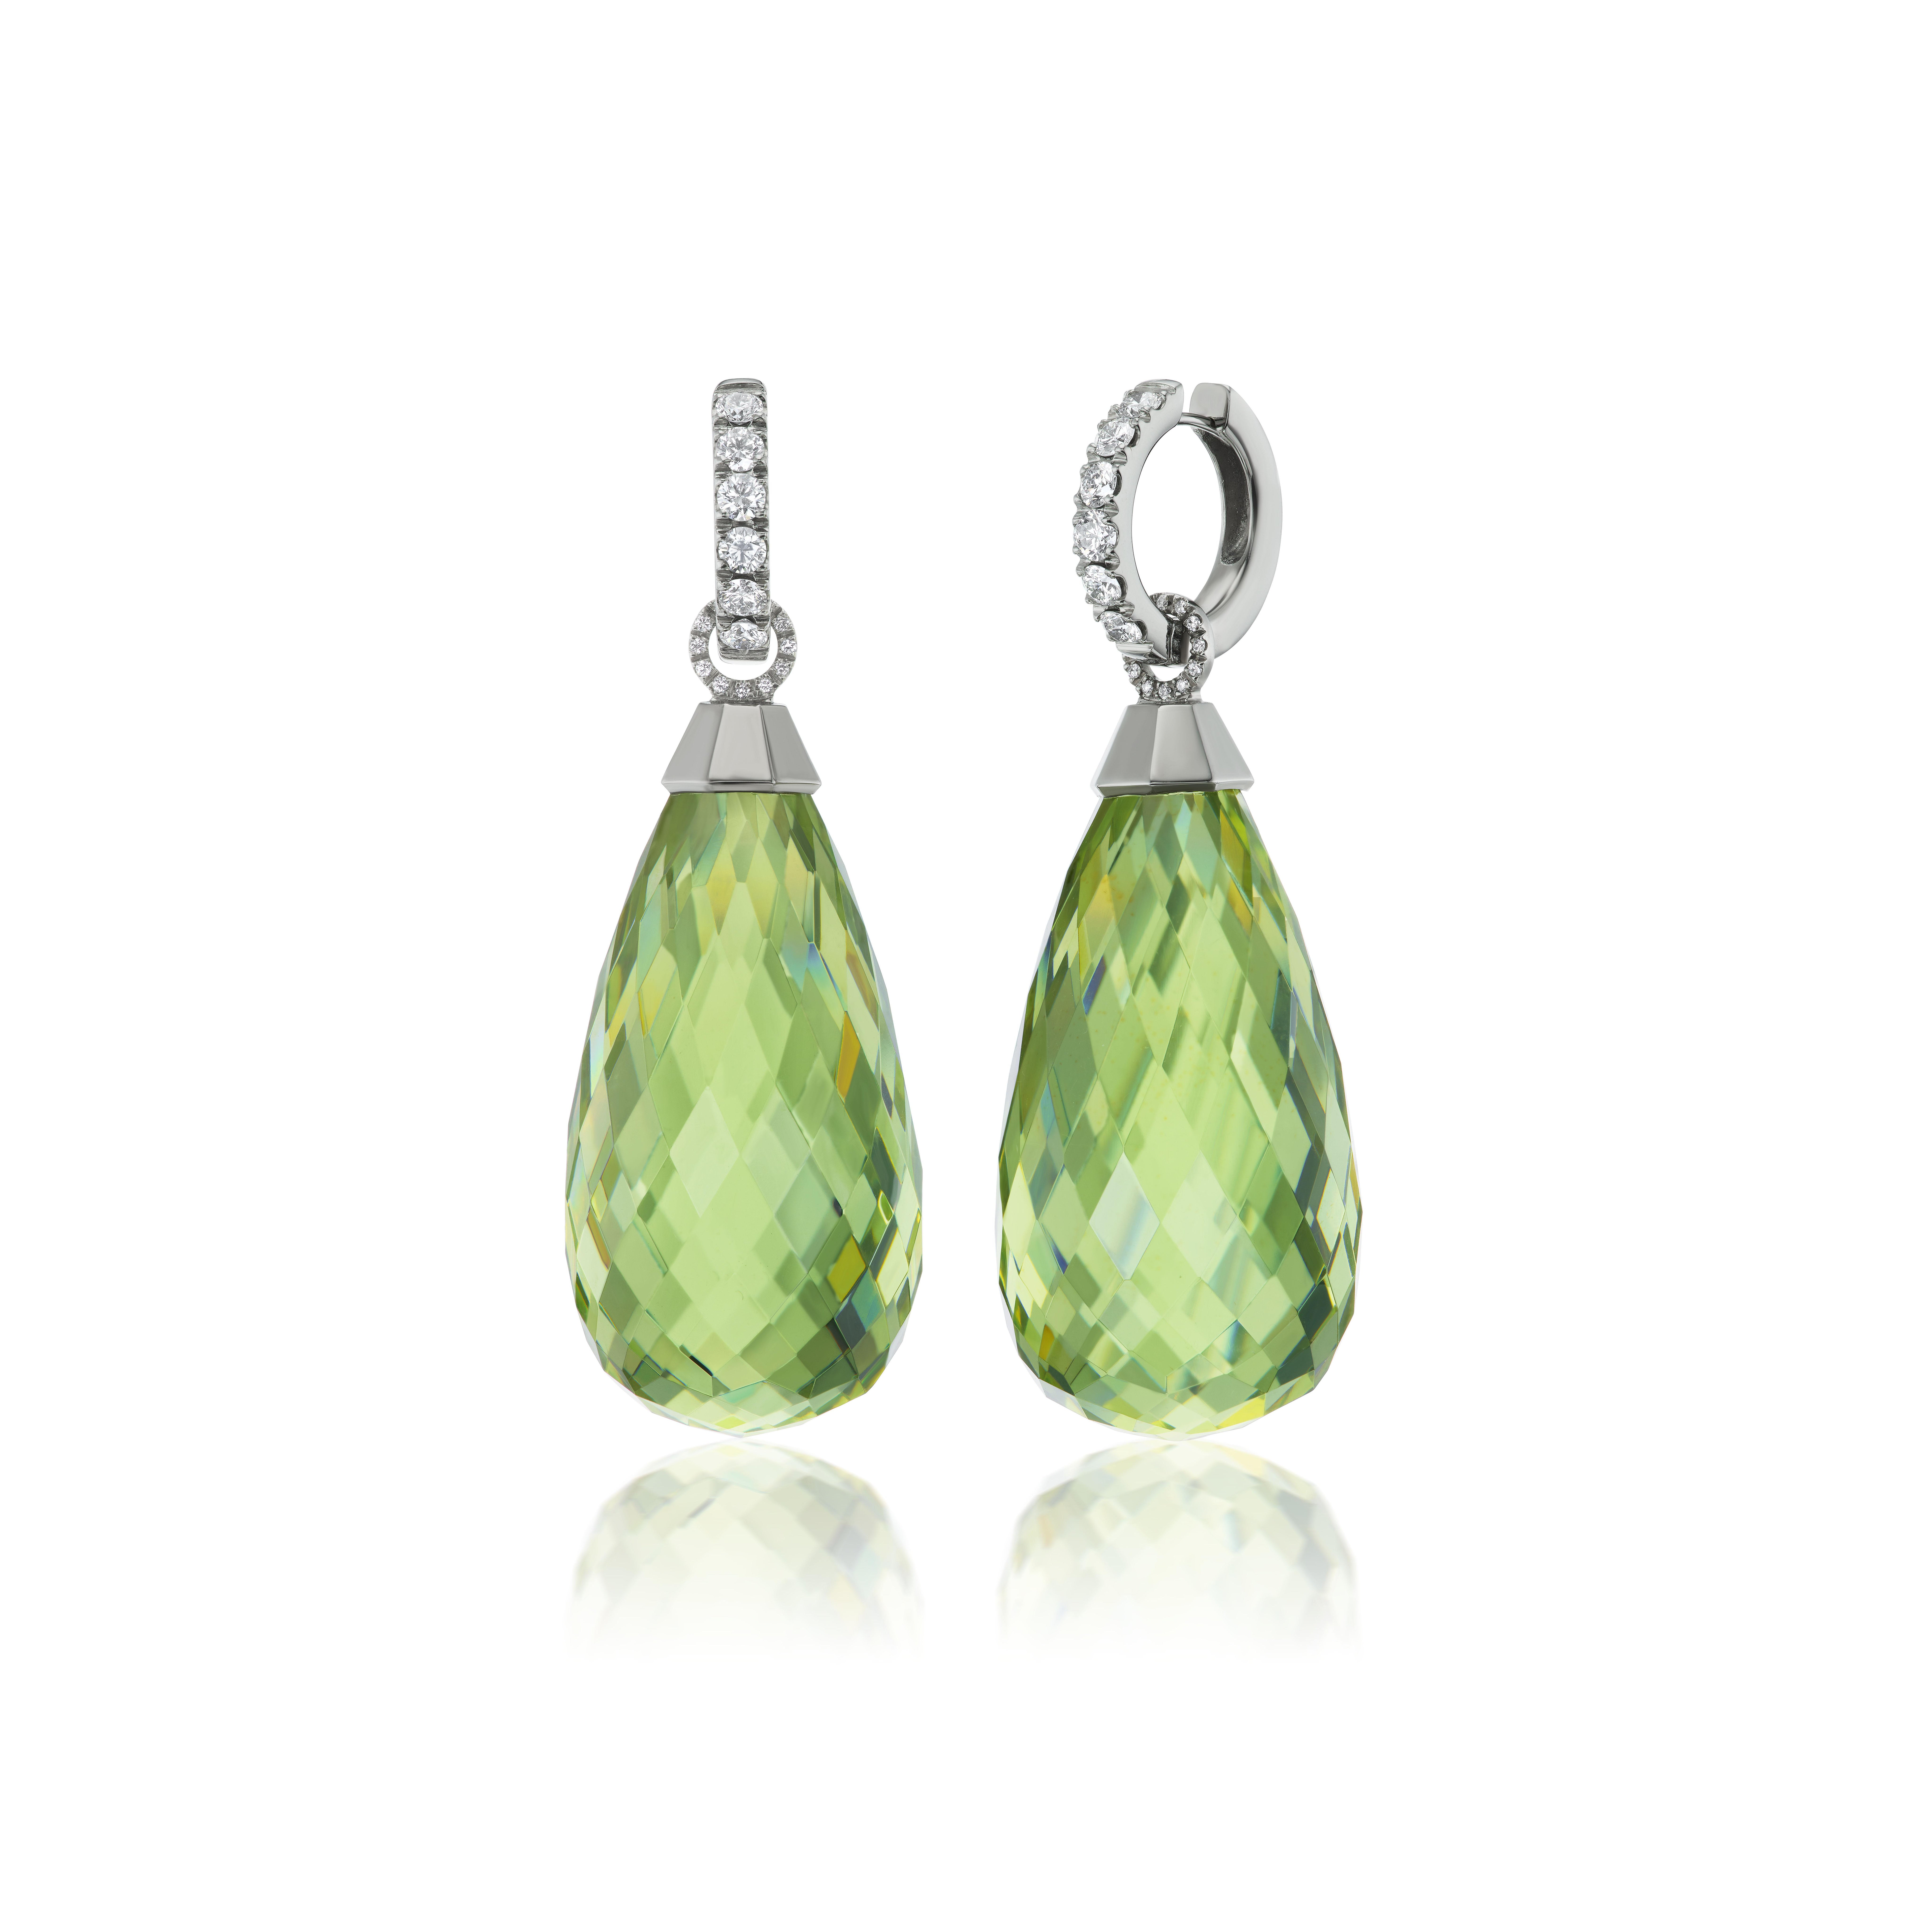 Elevate your jewelry collection with these captivating earrings. Crafted with meticulous attention to detail, each earring features a mesmerizing faceted green amber briolette suspended from a sleek titanium and diamond cap, creating a harmonious